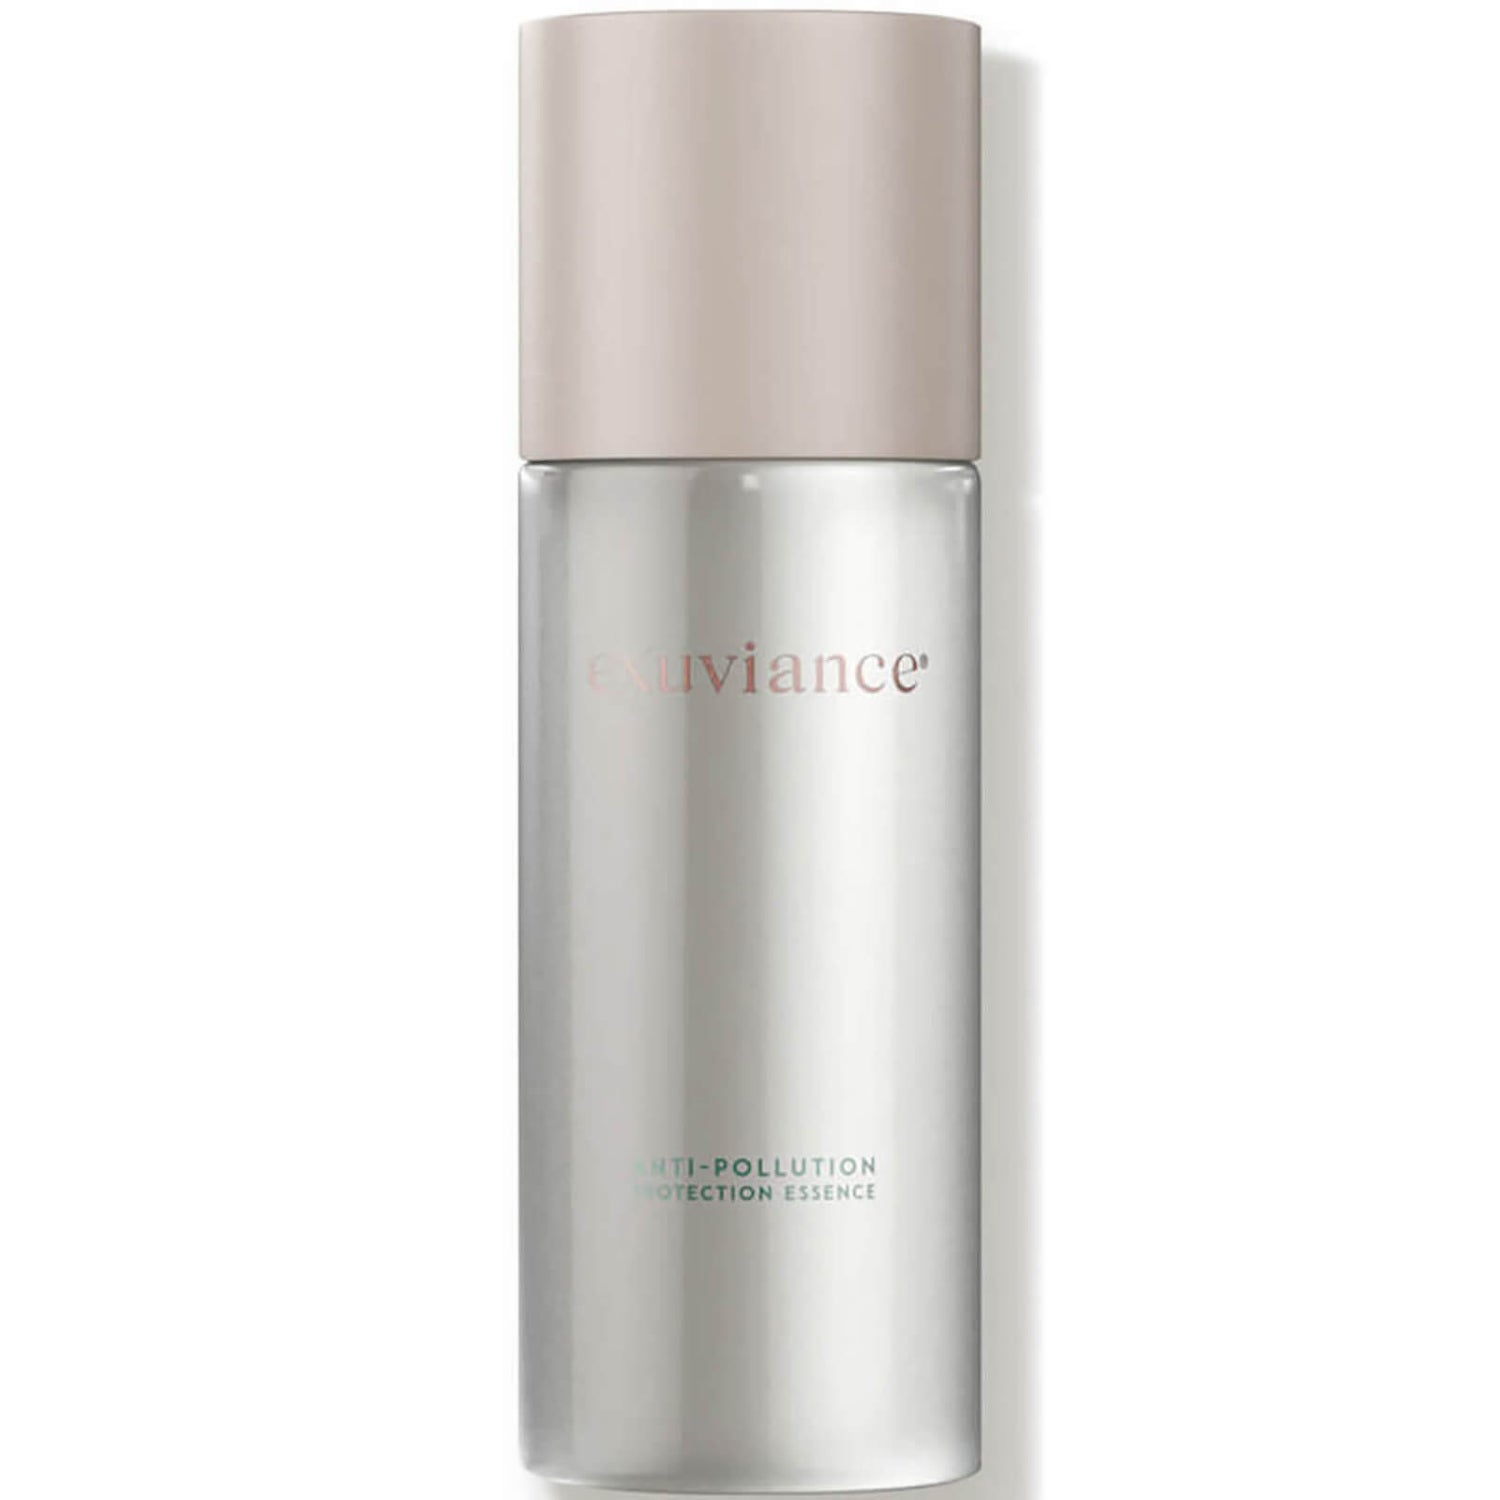 Exuviance Anti-Pollution Protection Essence 3 oz